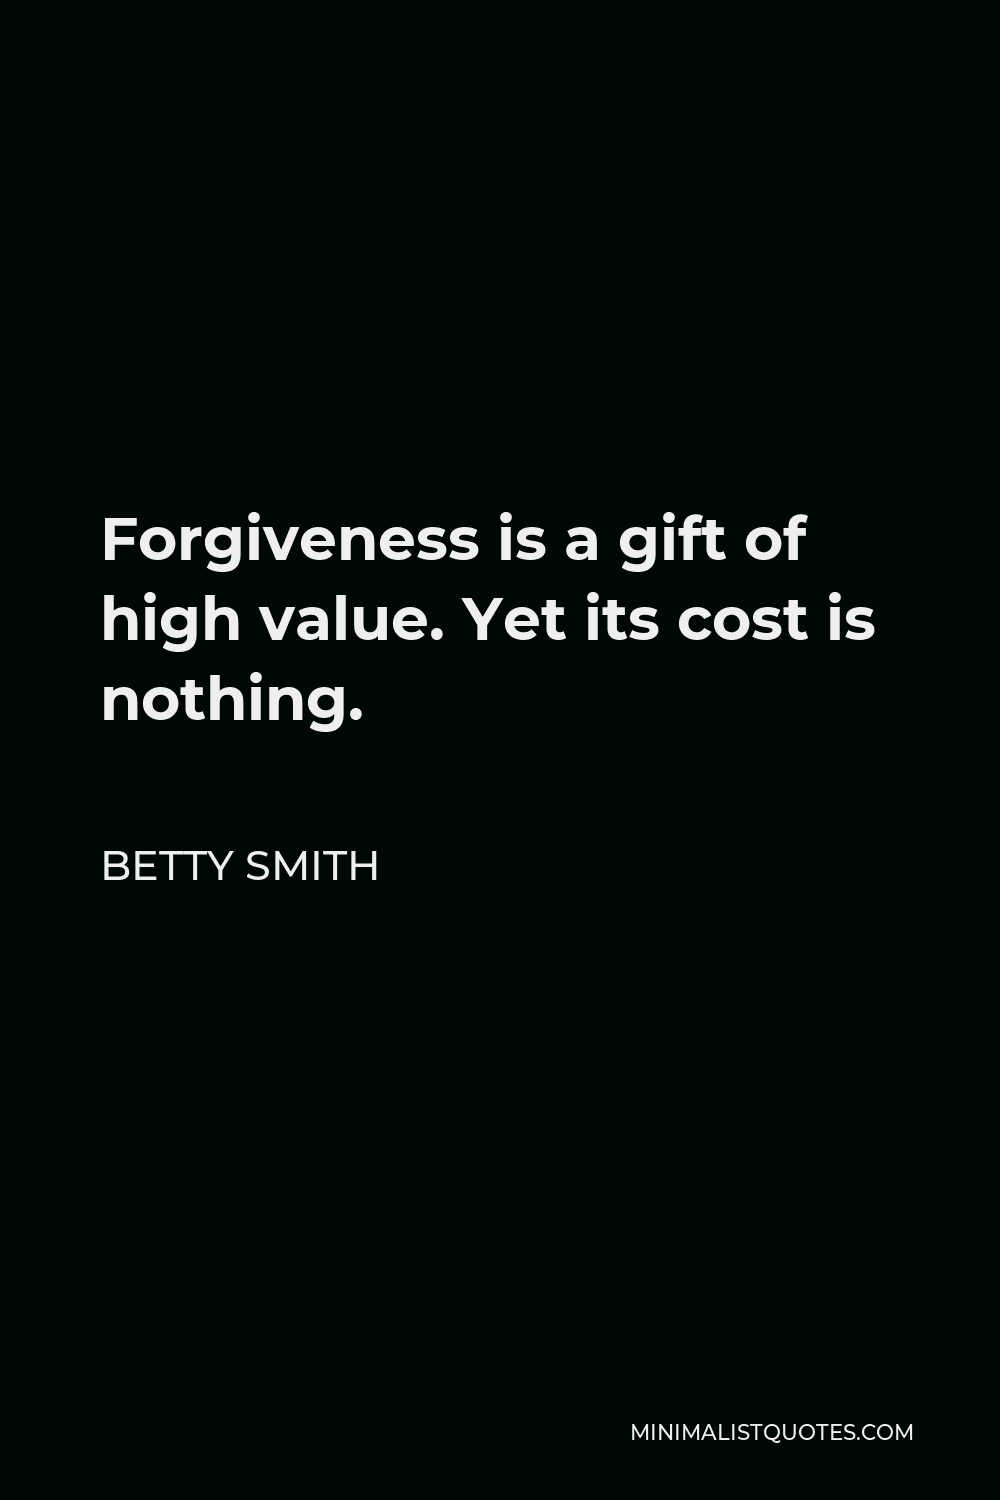 Betty Smith Quote - Forgiveness is a gift of high value. Yet its cost is nothing.